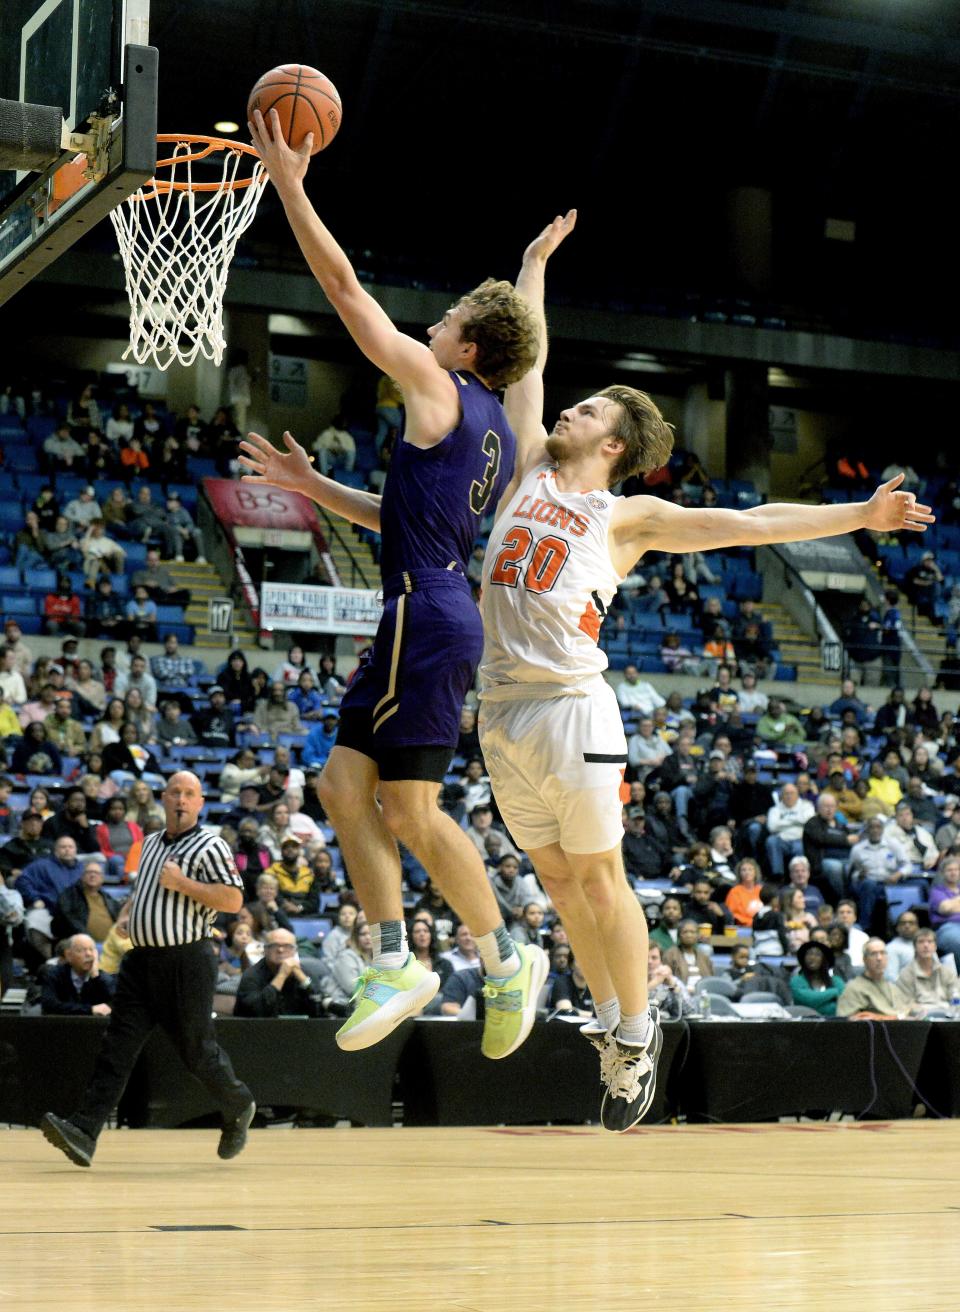 Sacred Heart-Griffin's Jake Hamilton goes up for a shot as he is being guarded by Lanphier High School's Austin Robinson during the boys championship game at the City Tournament Saturday Jan. 28, 2023.